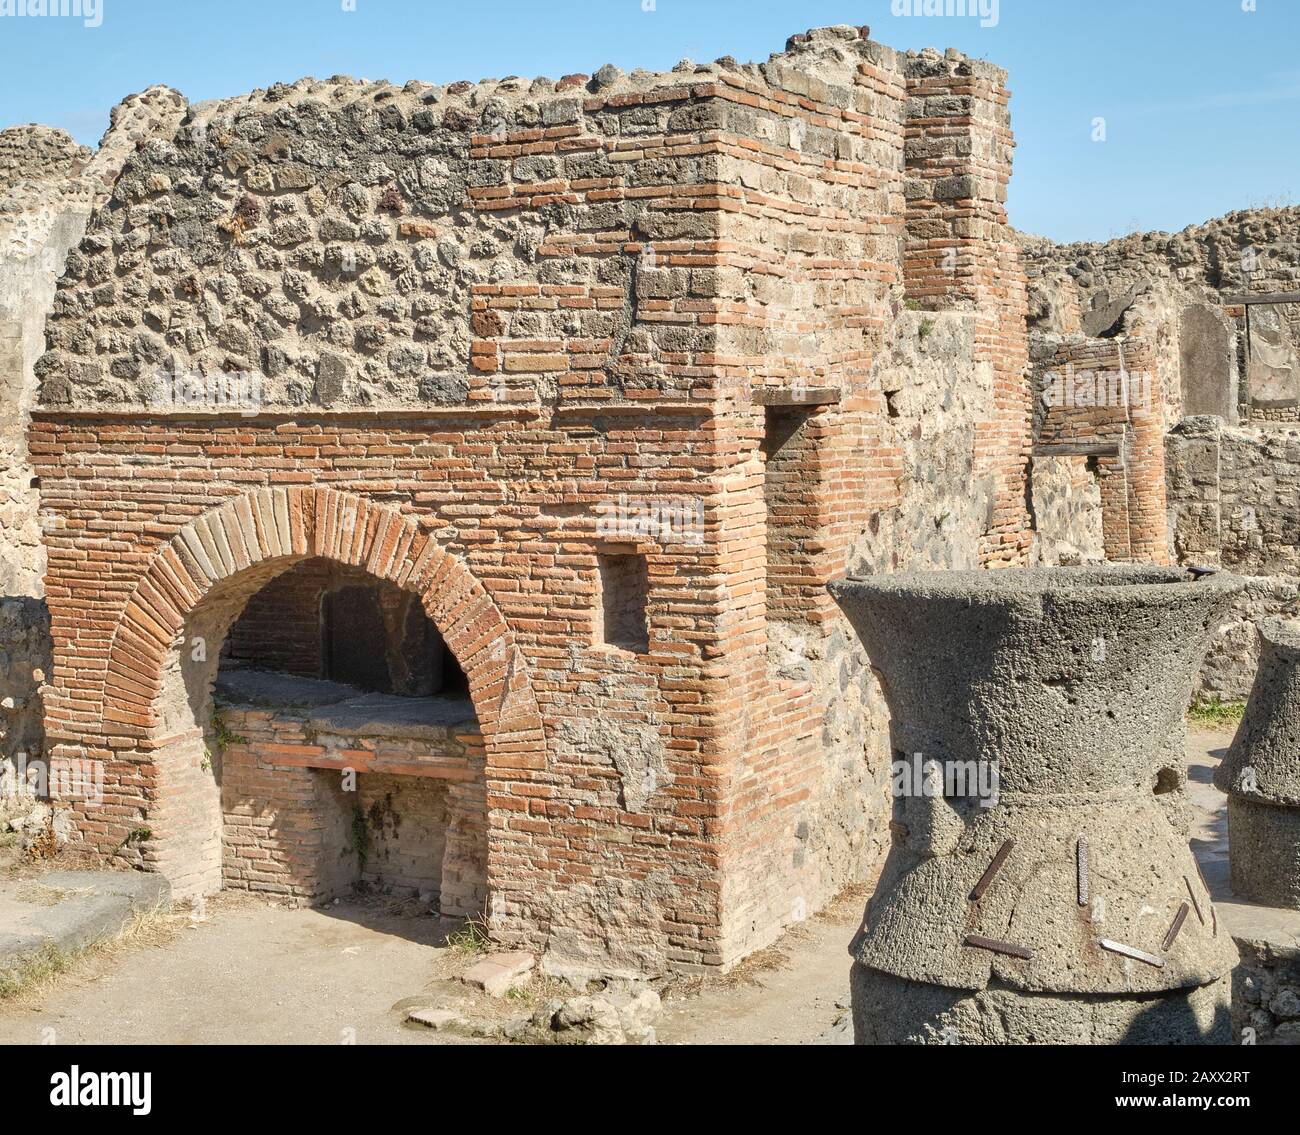 Brick bread oven and a flour mill at a bakery in the Roman ruins of Pompeii Stock Photo